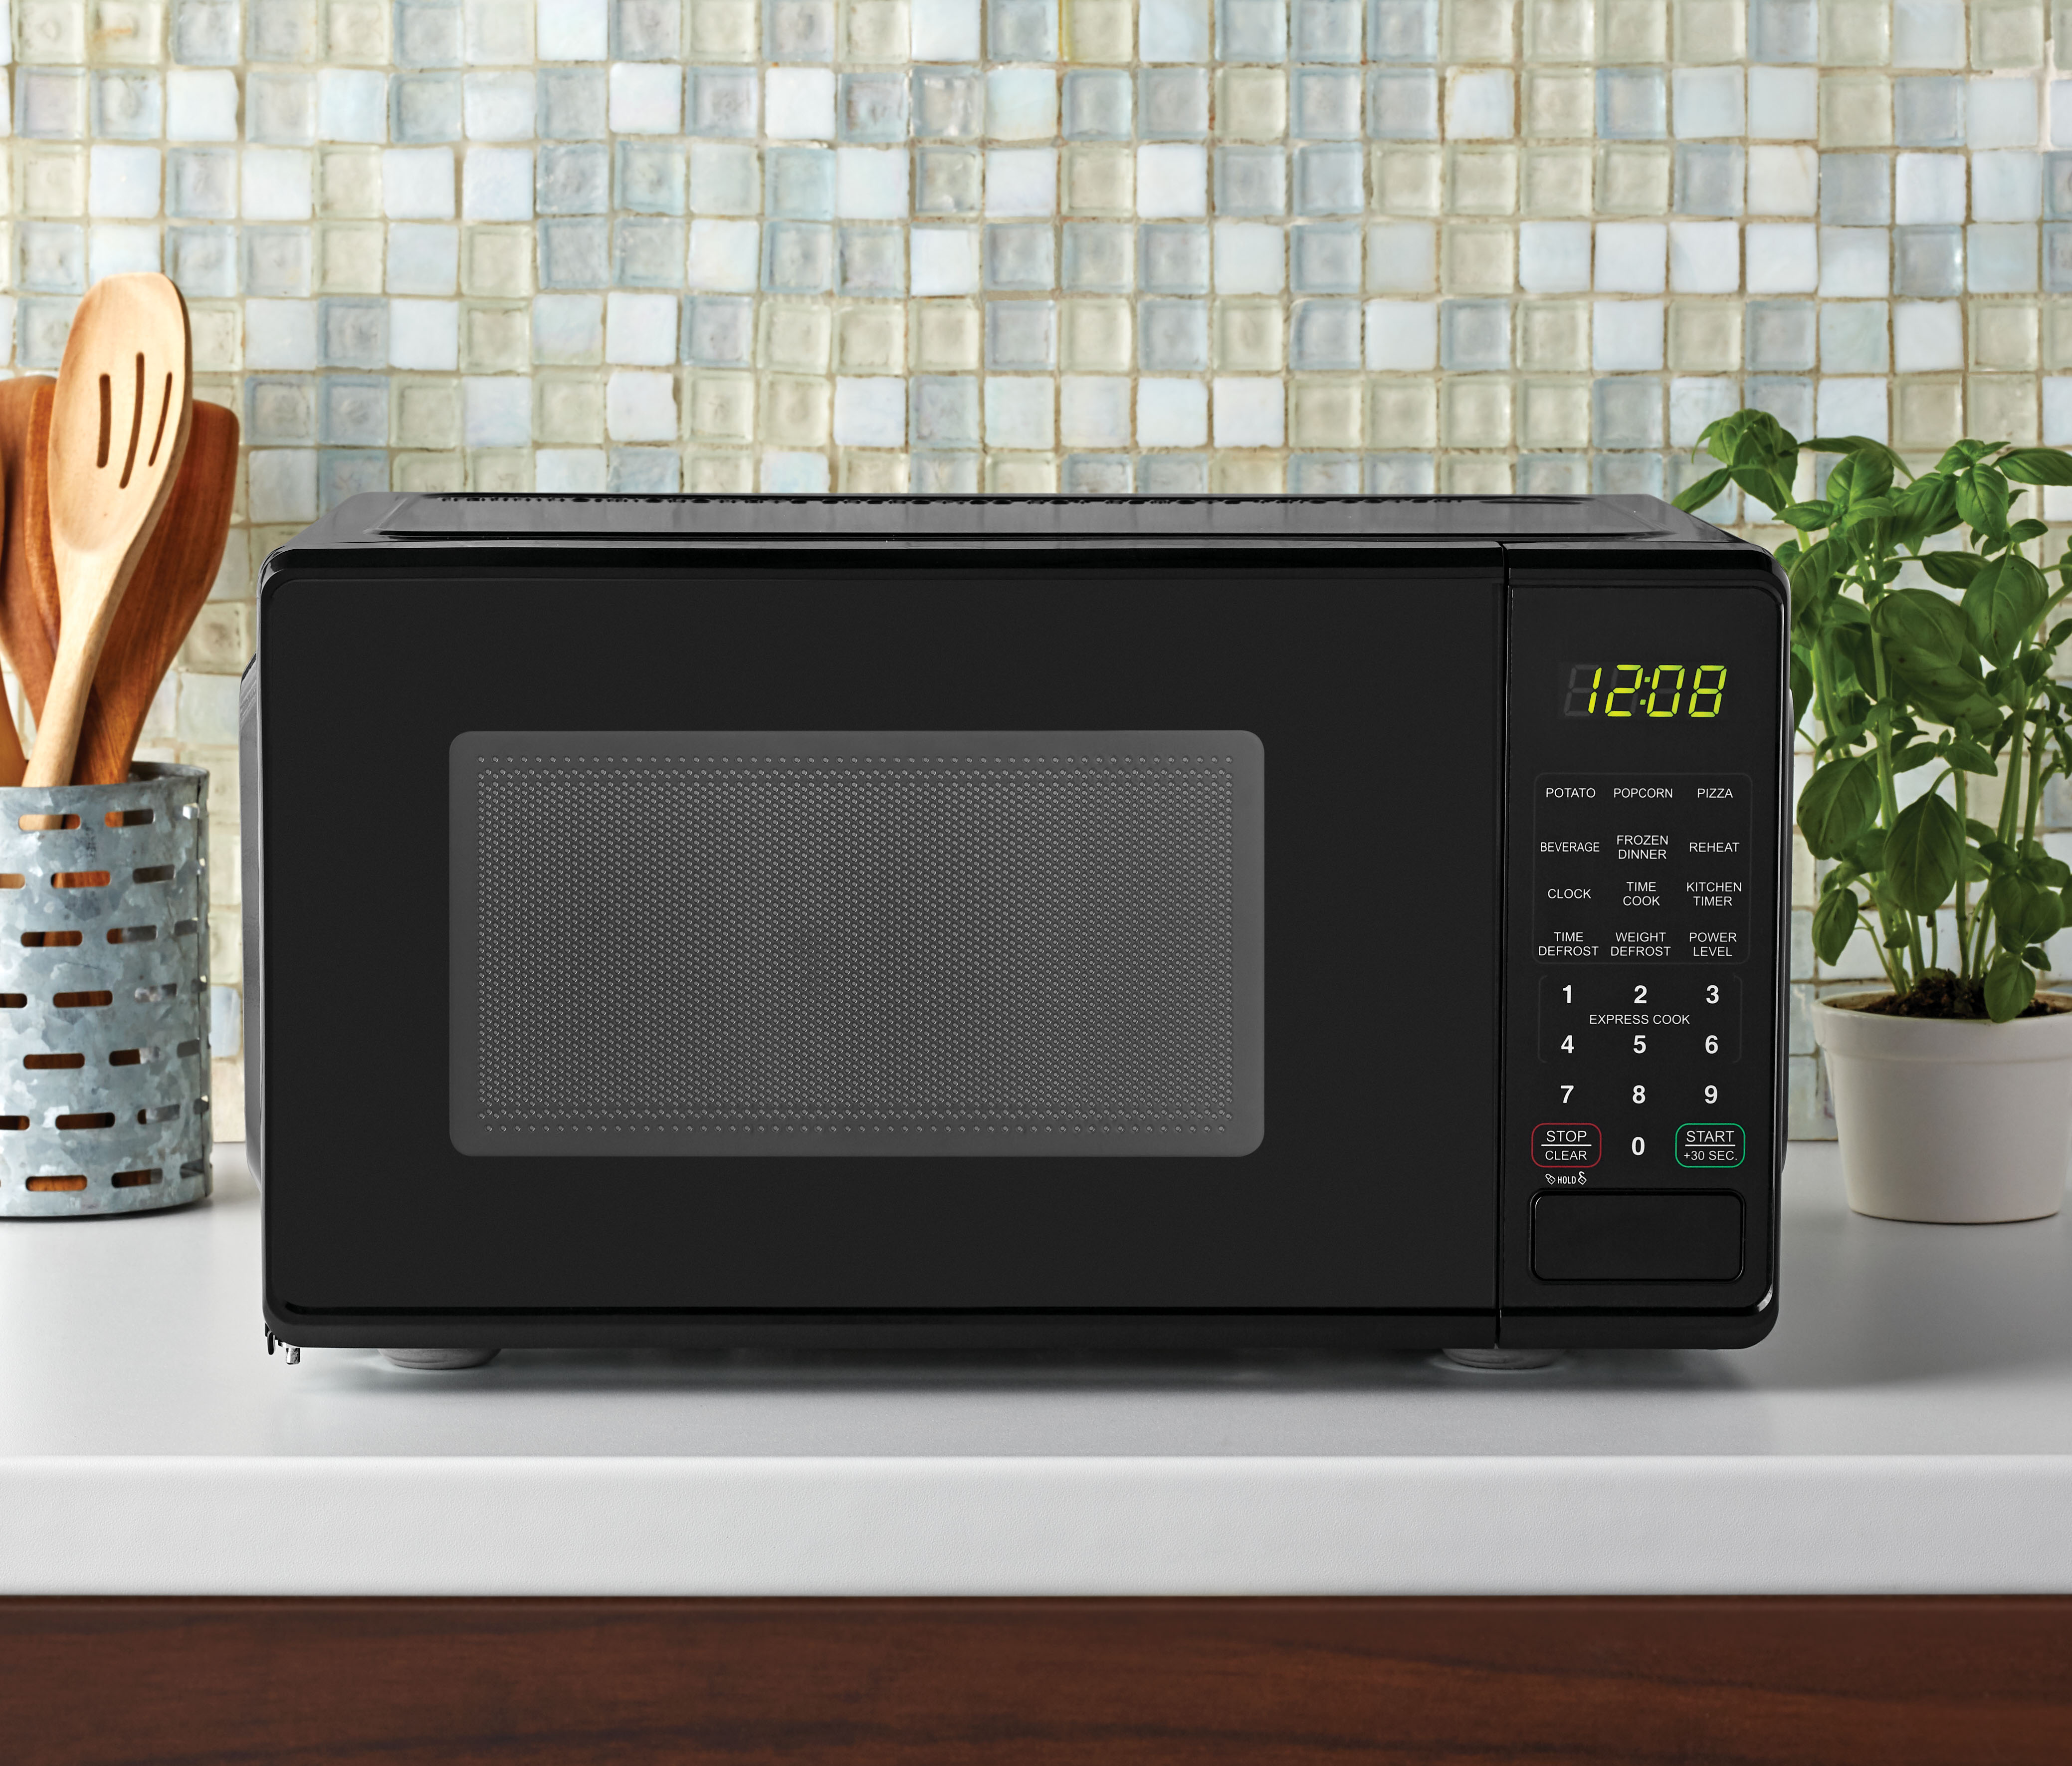 Mainstays 0.7 Cu ft Countertop Microwave Oven, 700 Watts, Black, New - image 9 of 10